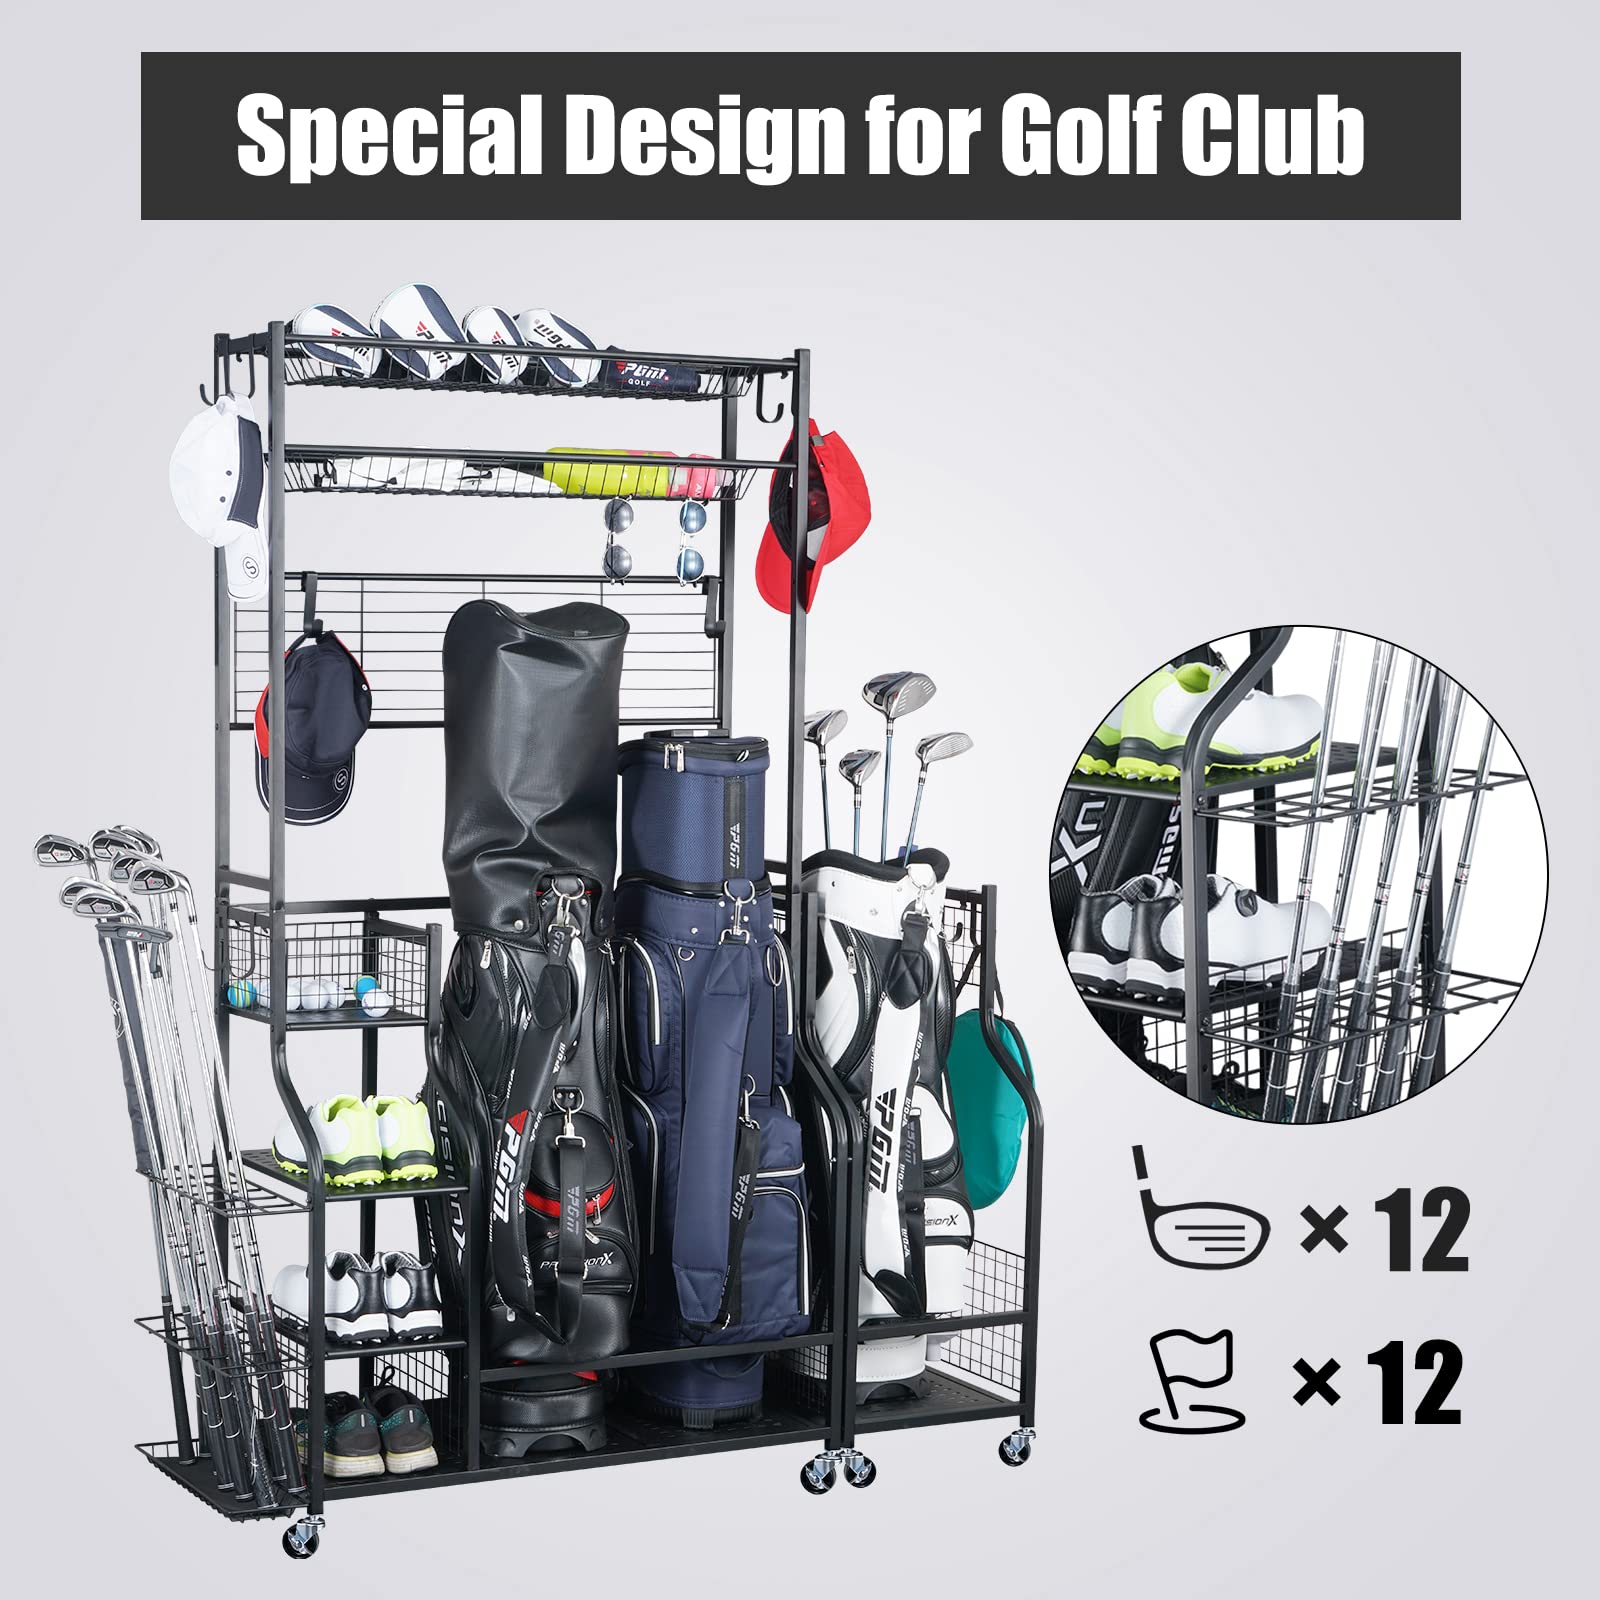 Mythinglogic Golf club Rack for Garage with Extra Golf Bag Rack and Top Organizer, Best Gift for Golfers